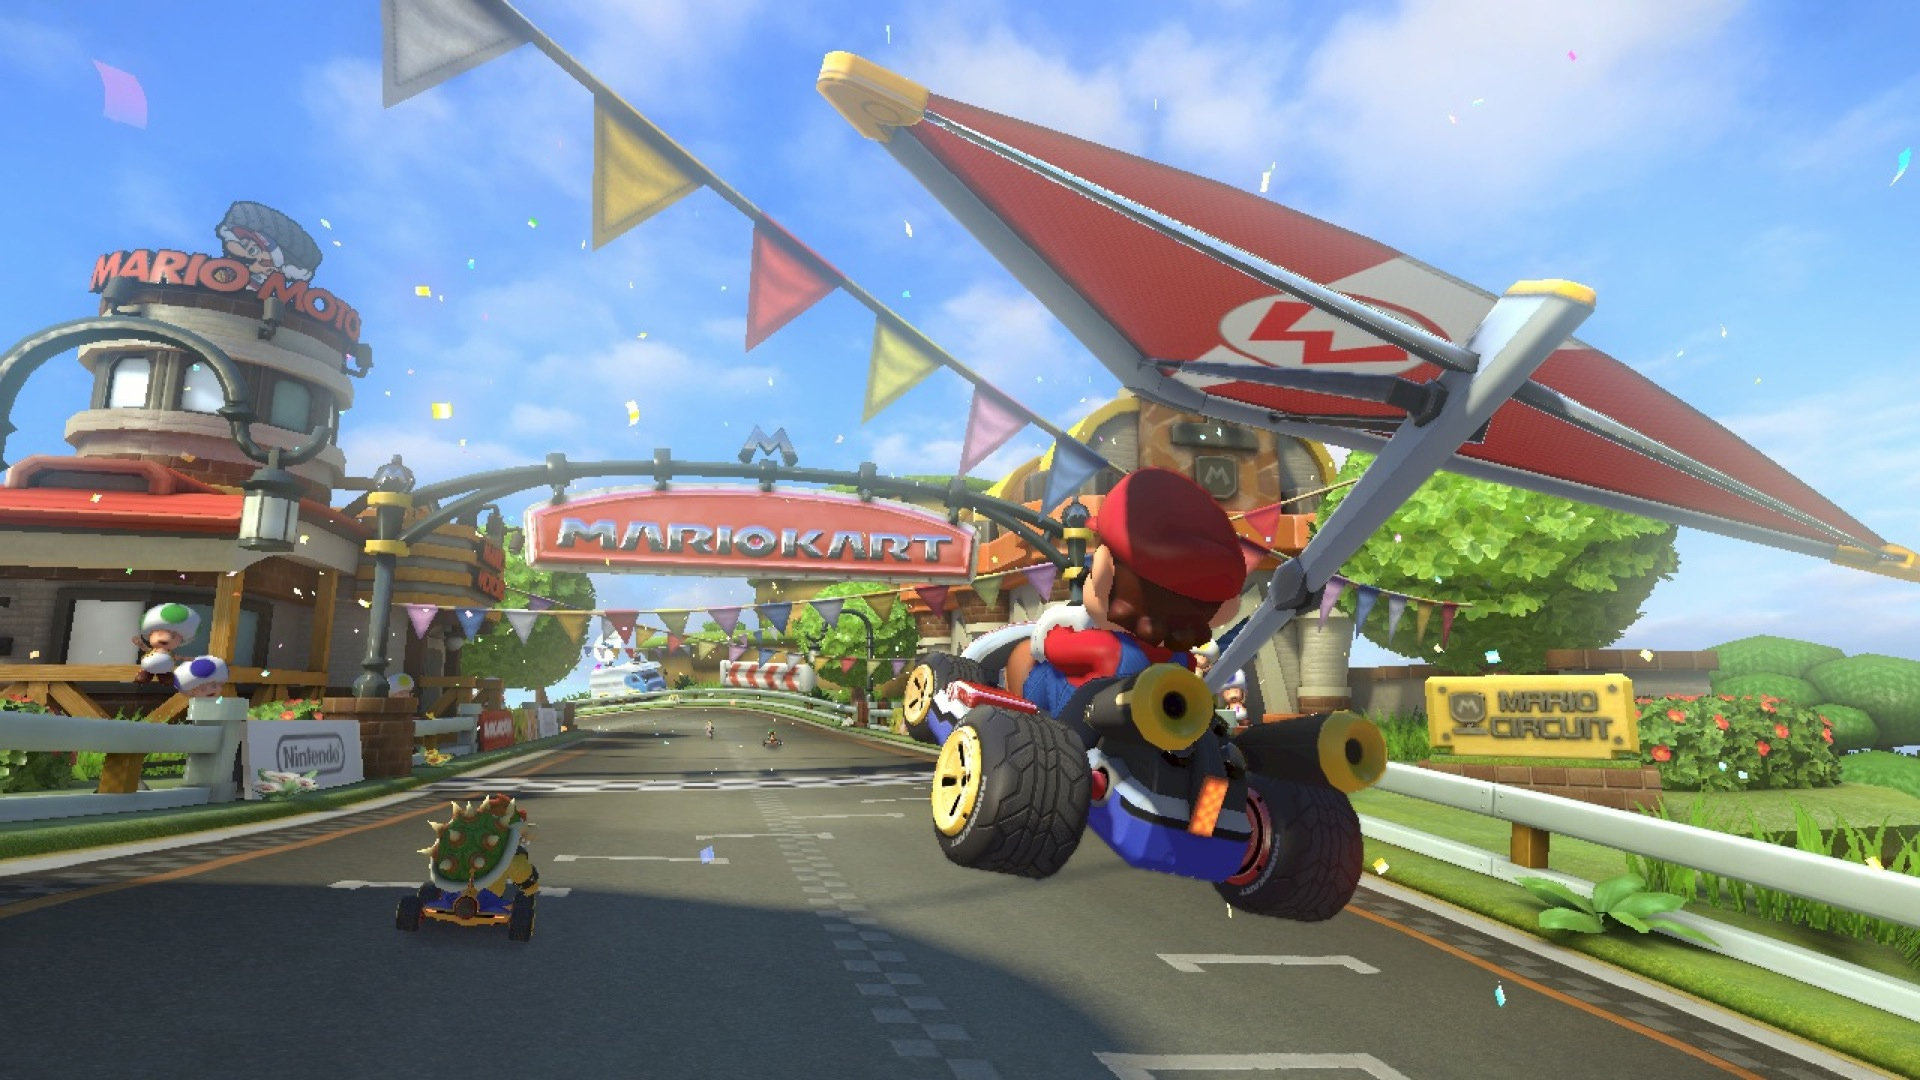 Awesome Mario Kart 8 free wallpaper ID:433282 for hd 1080p computer